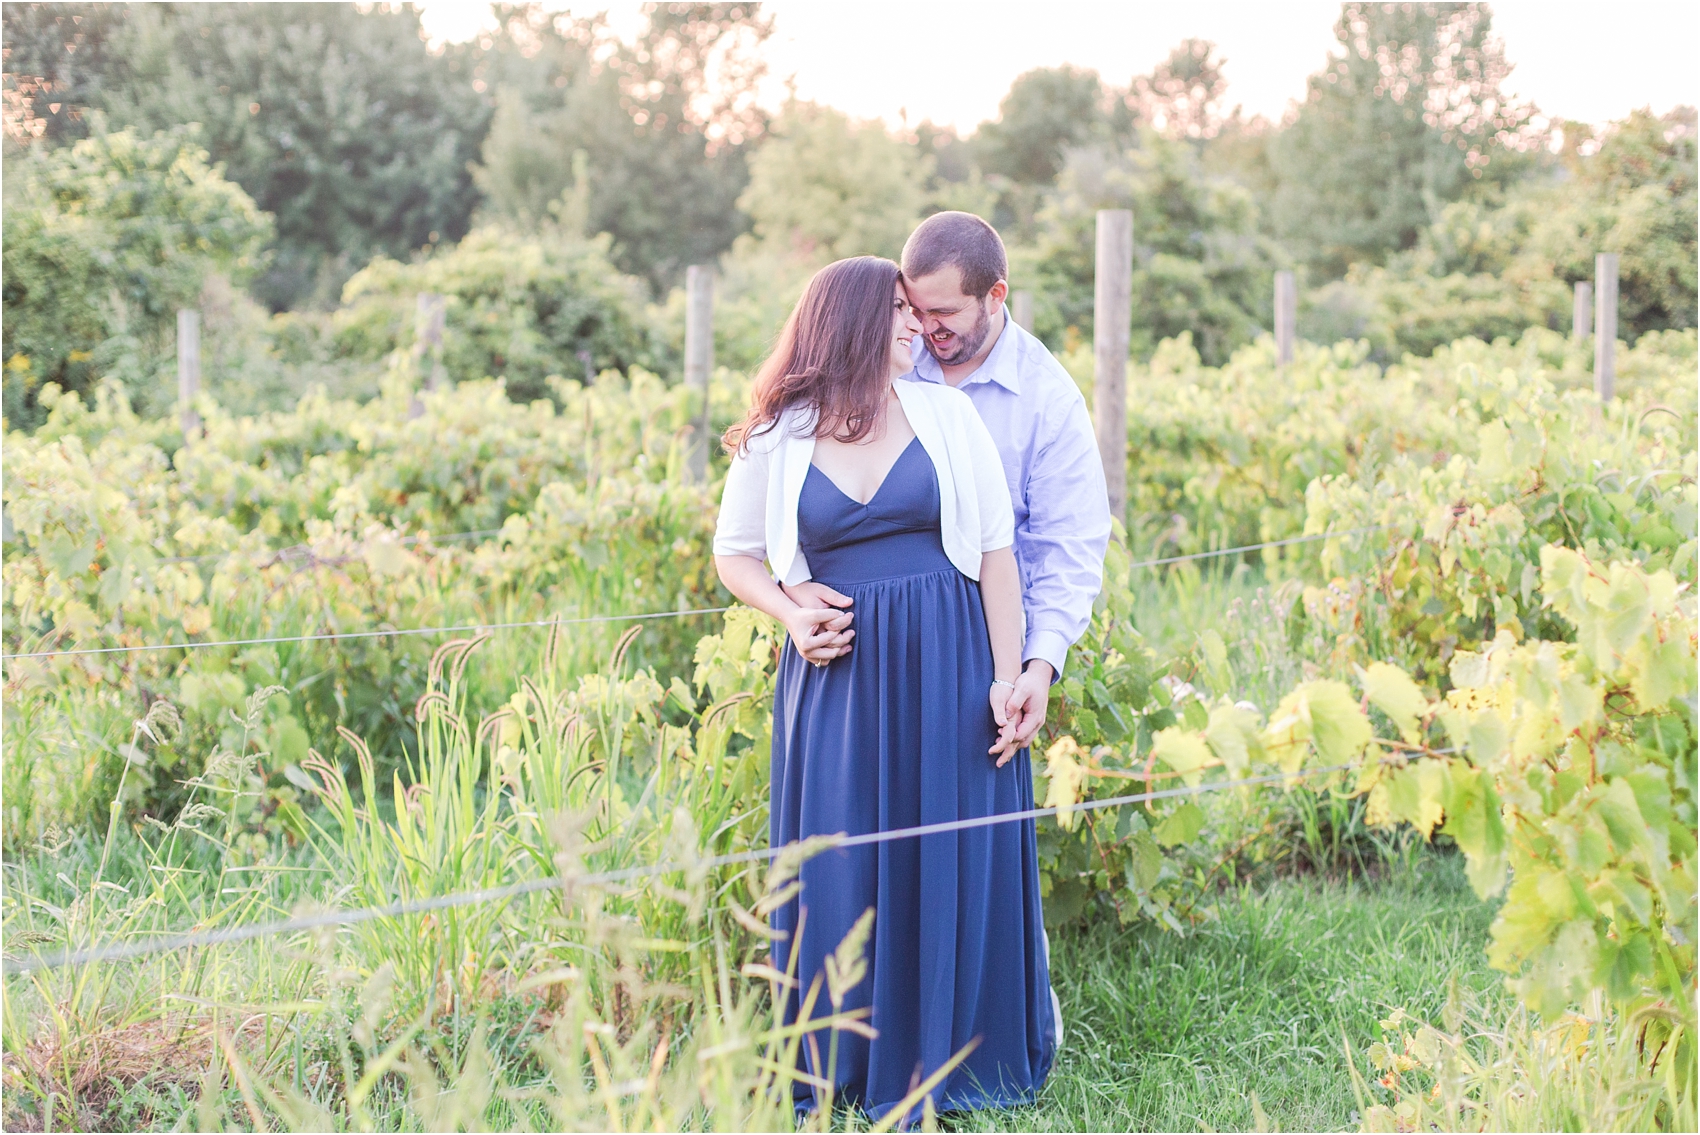 candid-romantic-summer-engagement-photos-at-hidden-lake-gardens-and-black-fire-winery-in-tipton-mi-by-courtney-carolyn-photography_0015.jpg